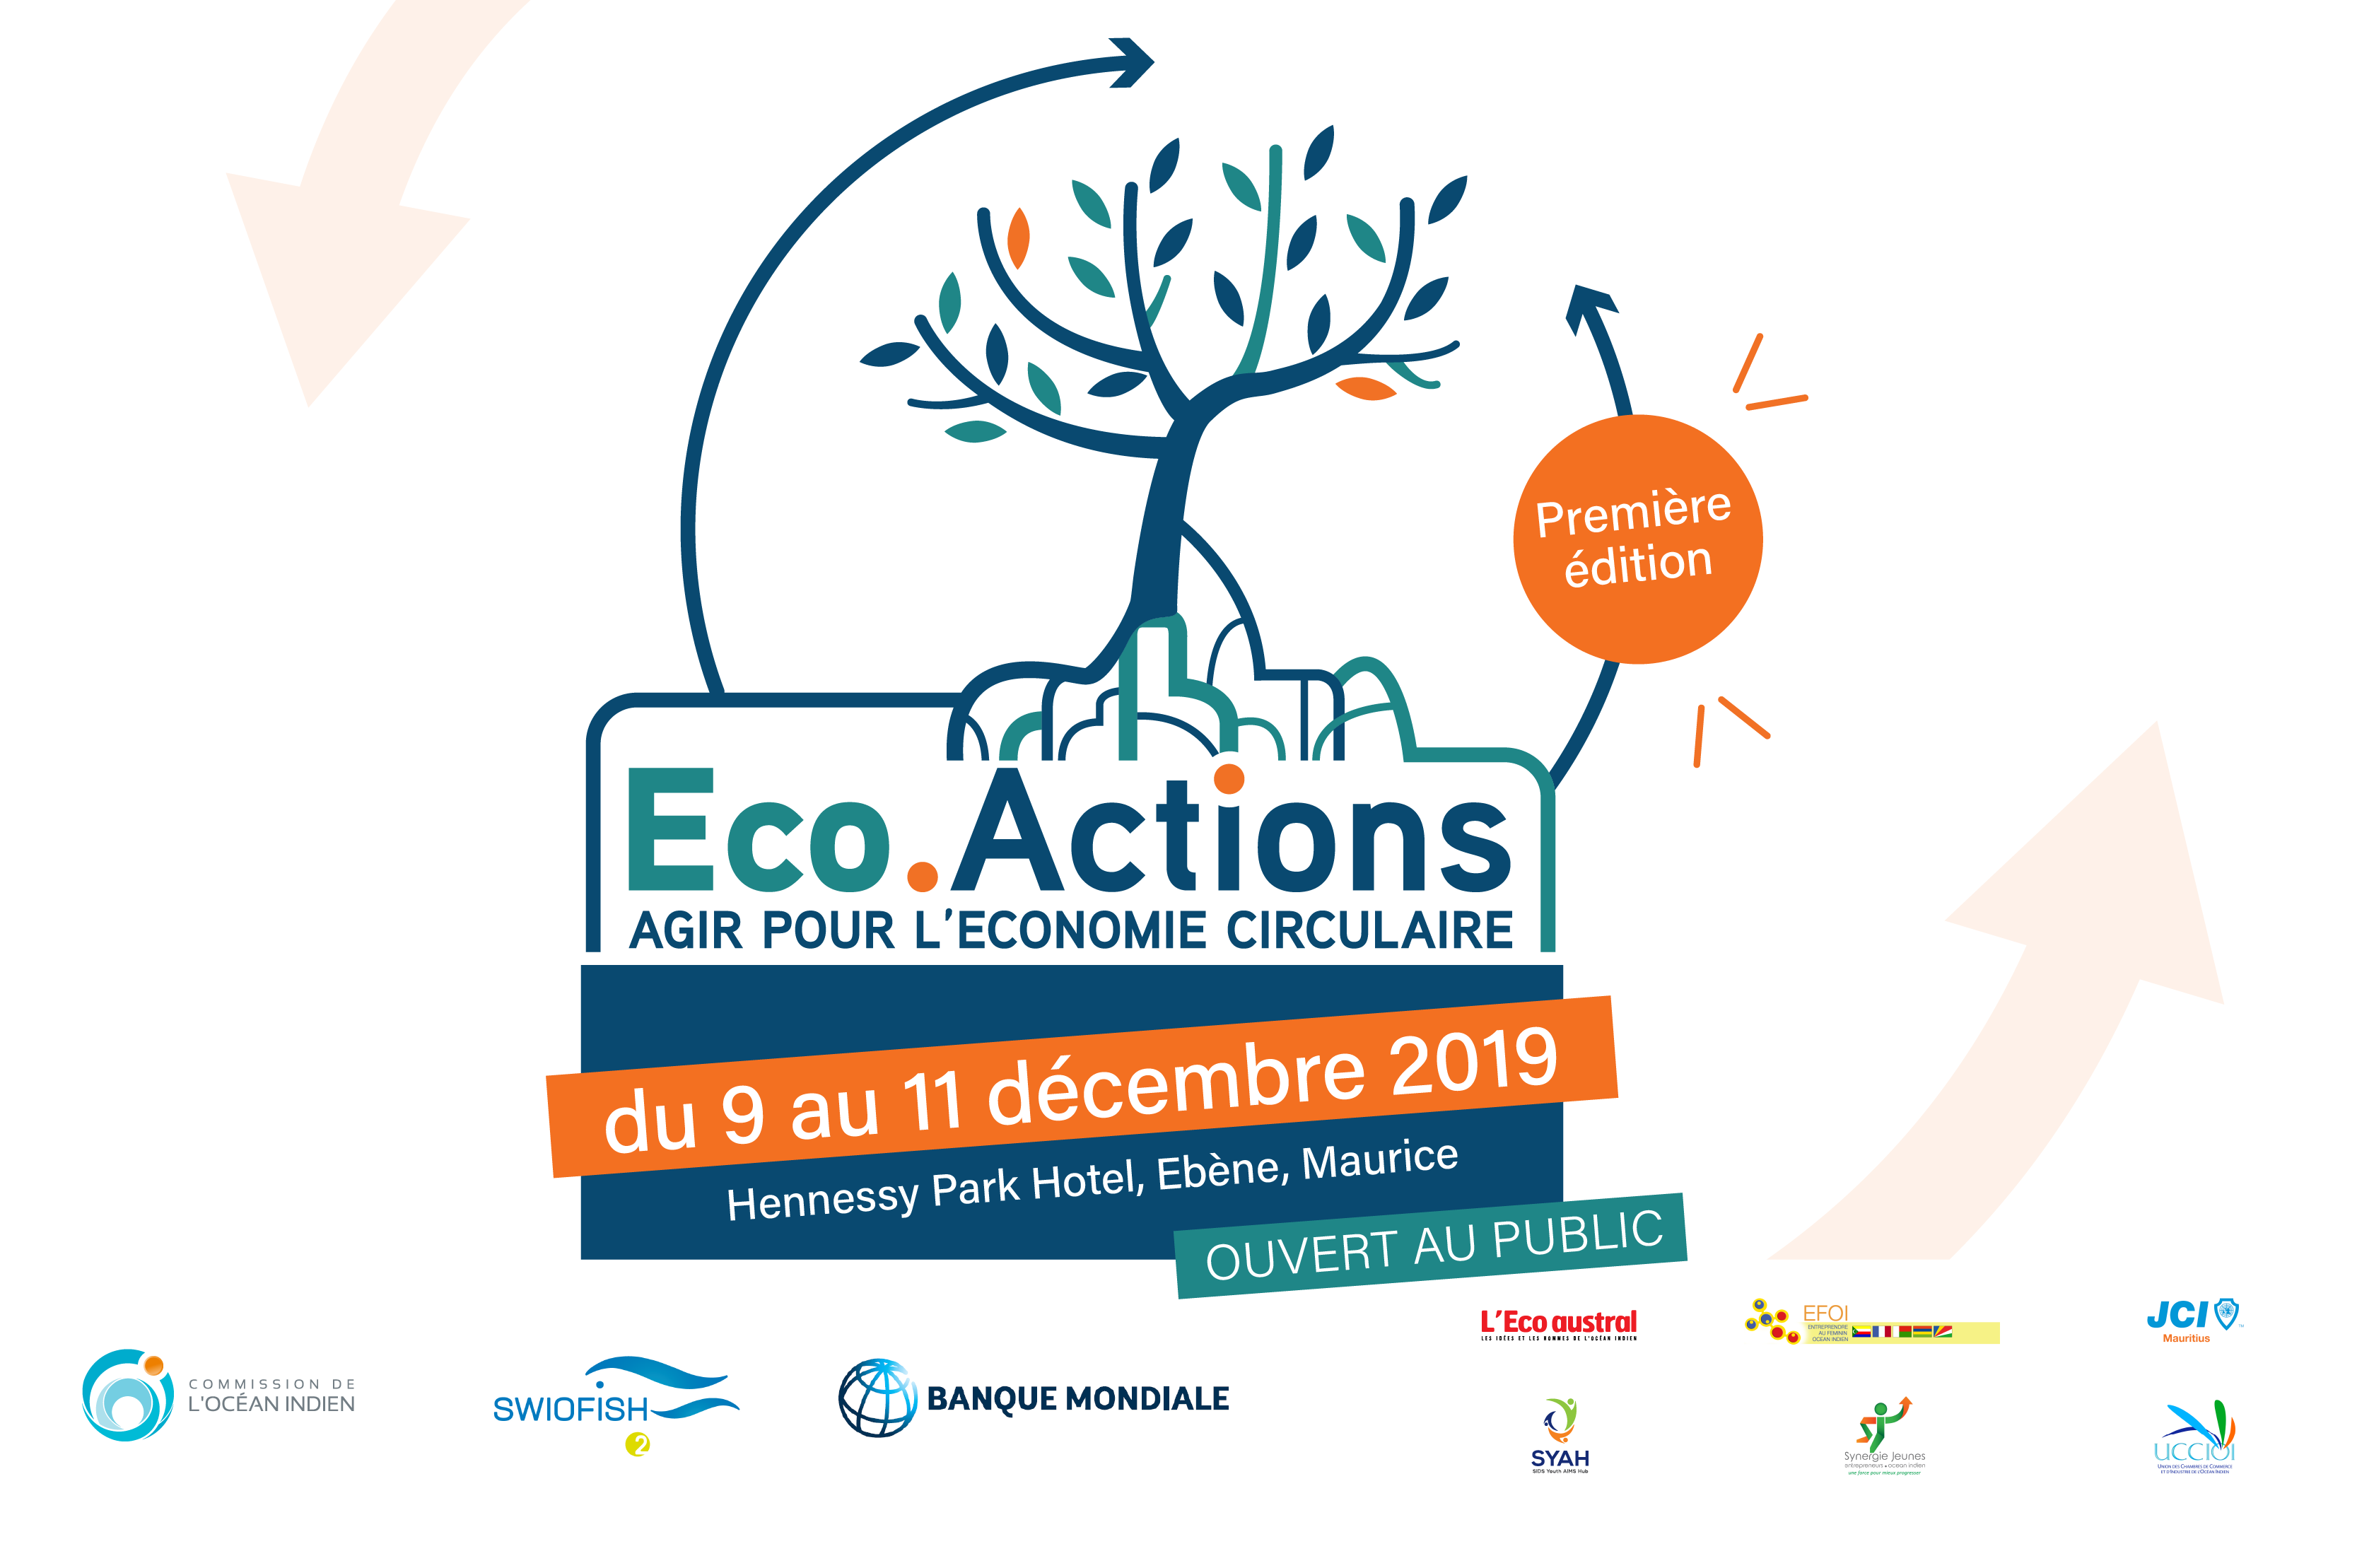 Eco.Actions